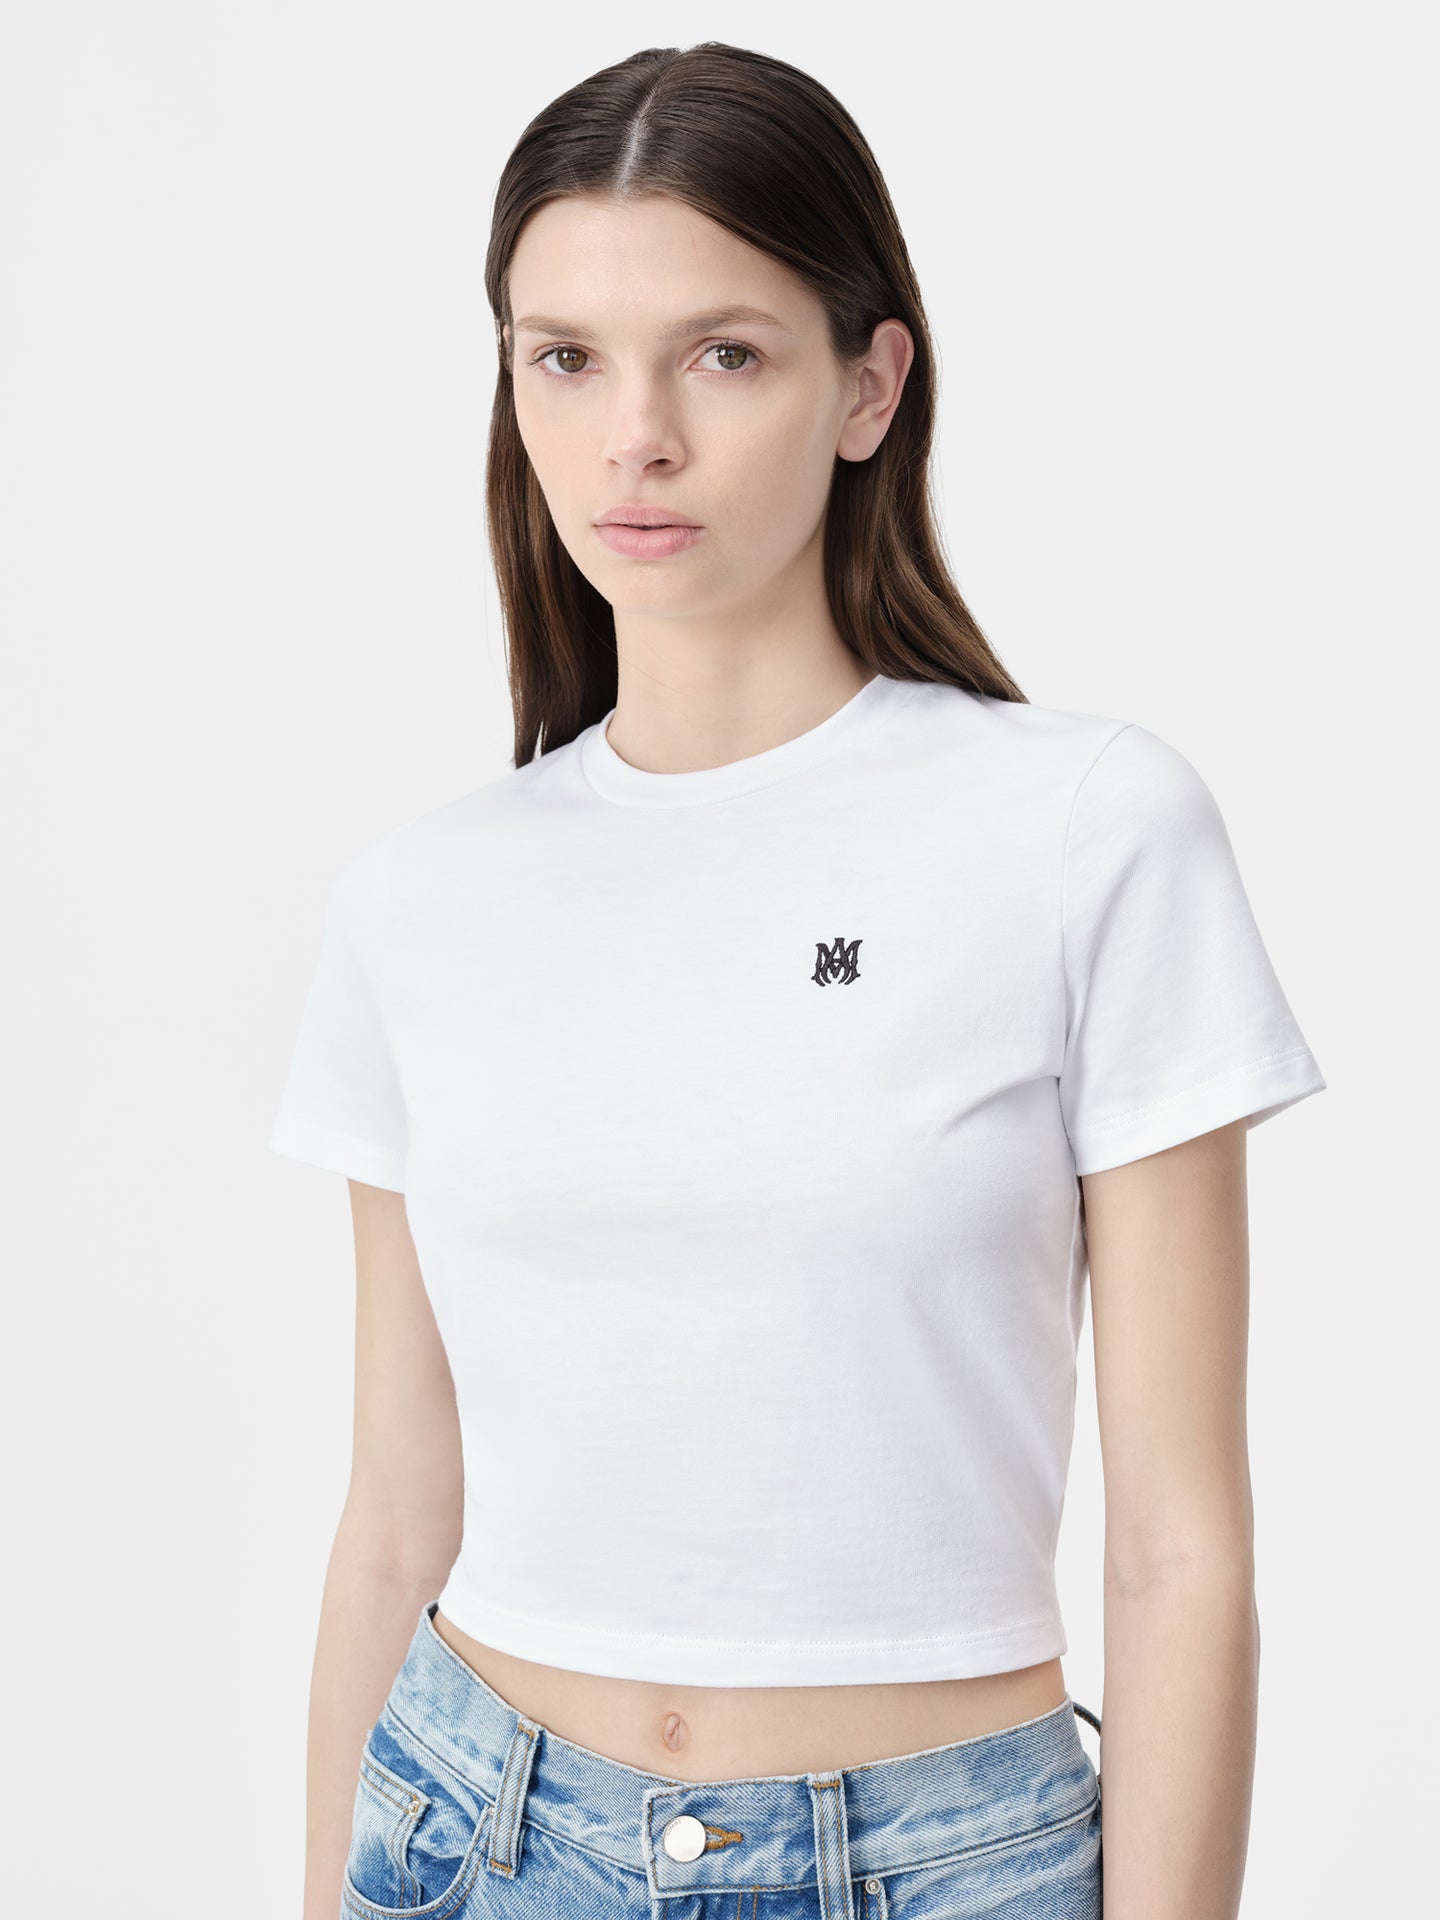 WOMEN - MA EMBROIDERED BABY TEE - White